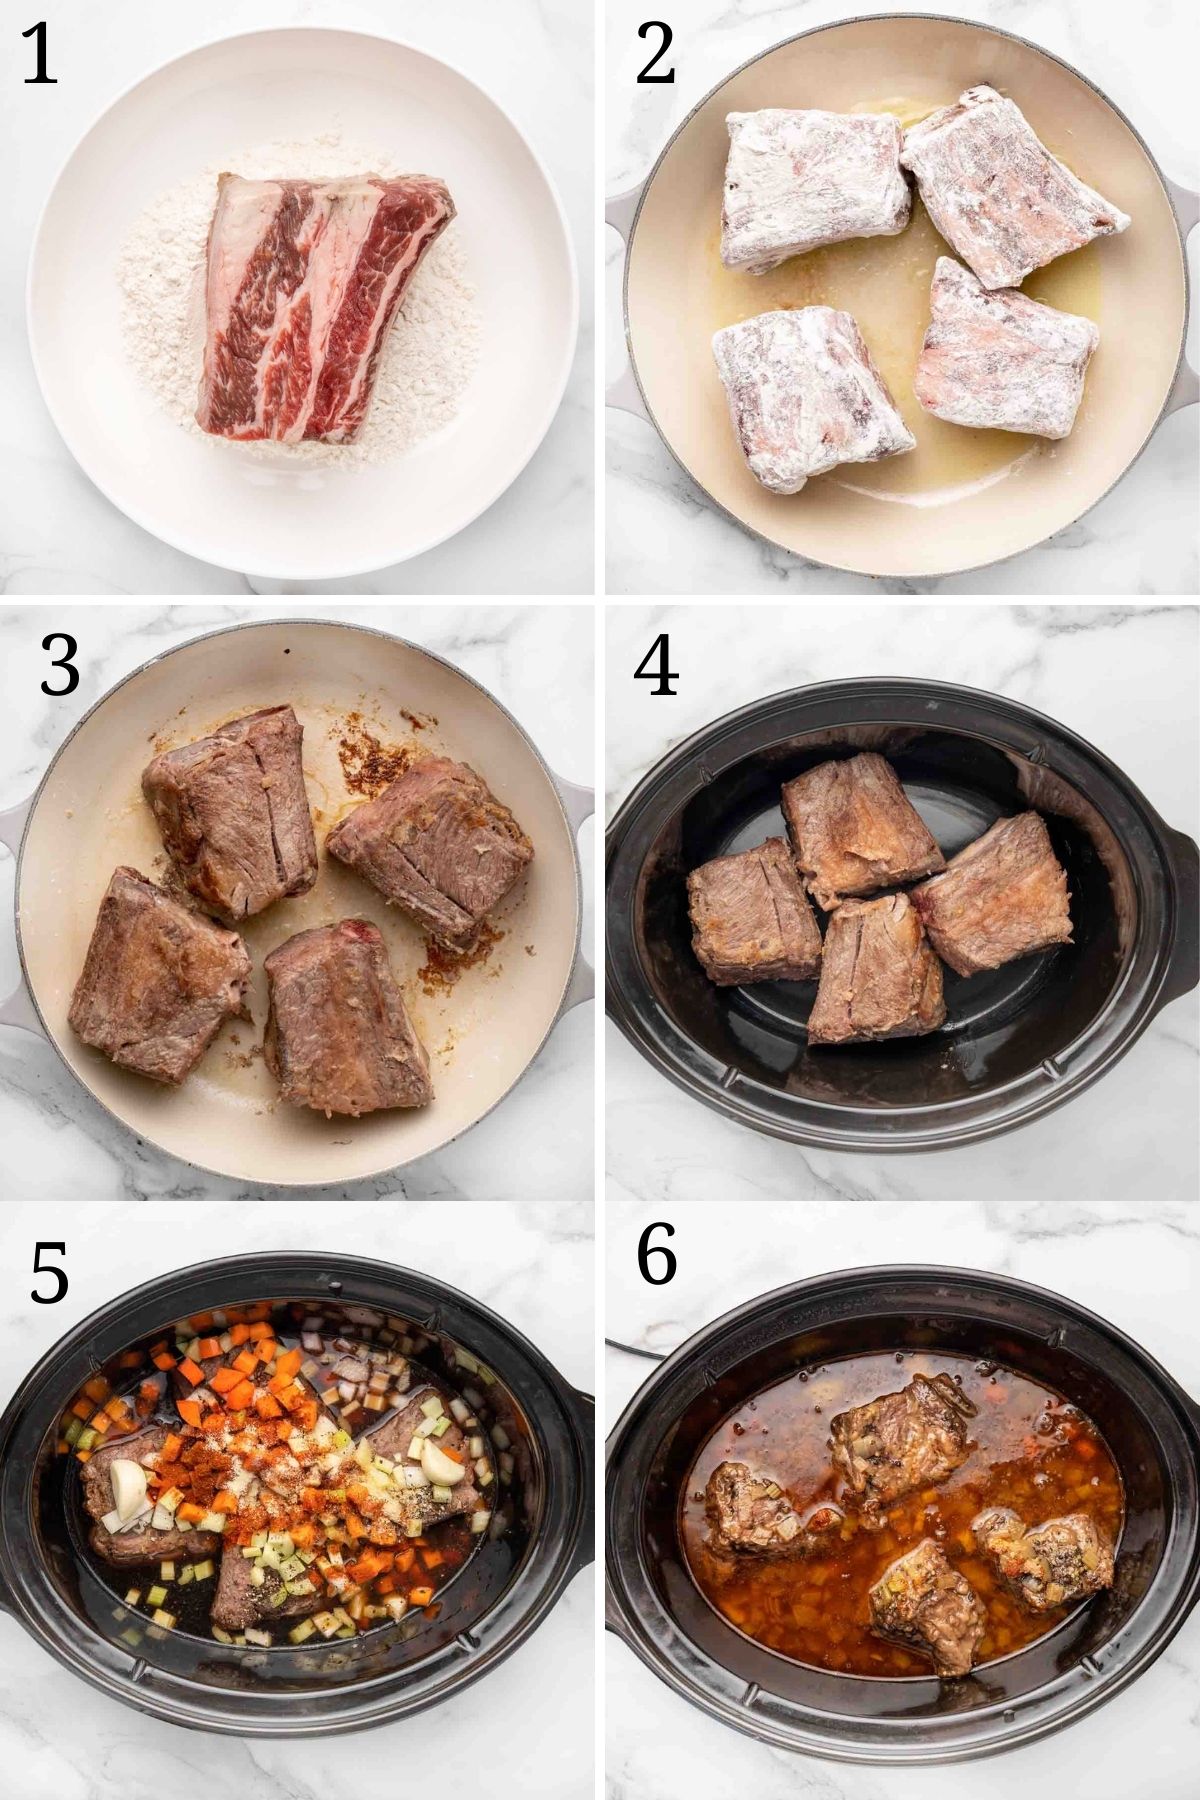 6 images showing how to make braised short ribs of beef